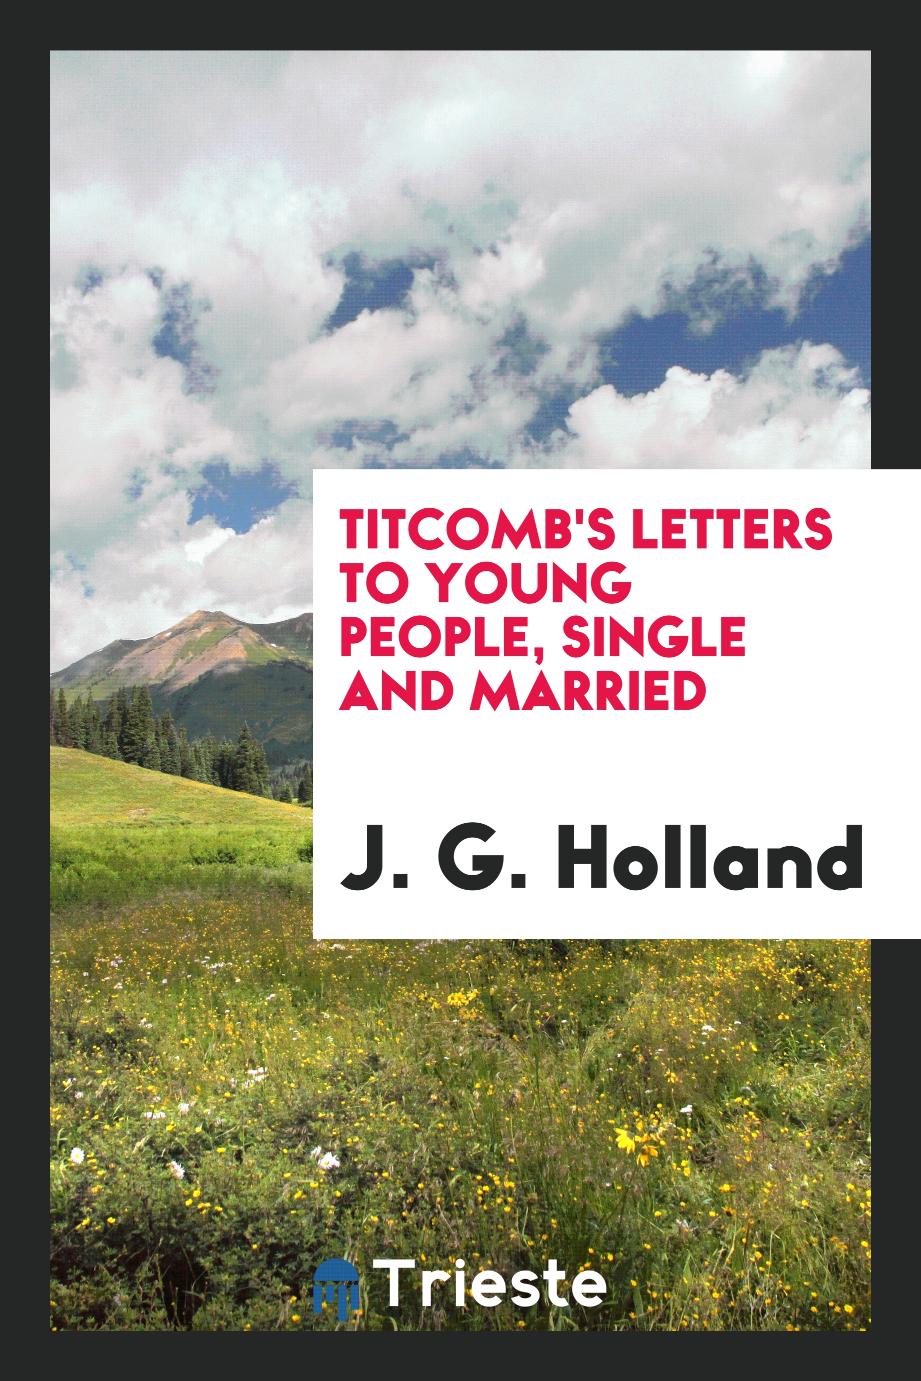 Titcomb's letters to young people, single and married